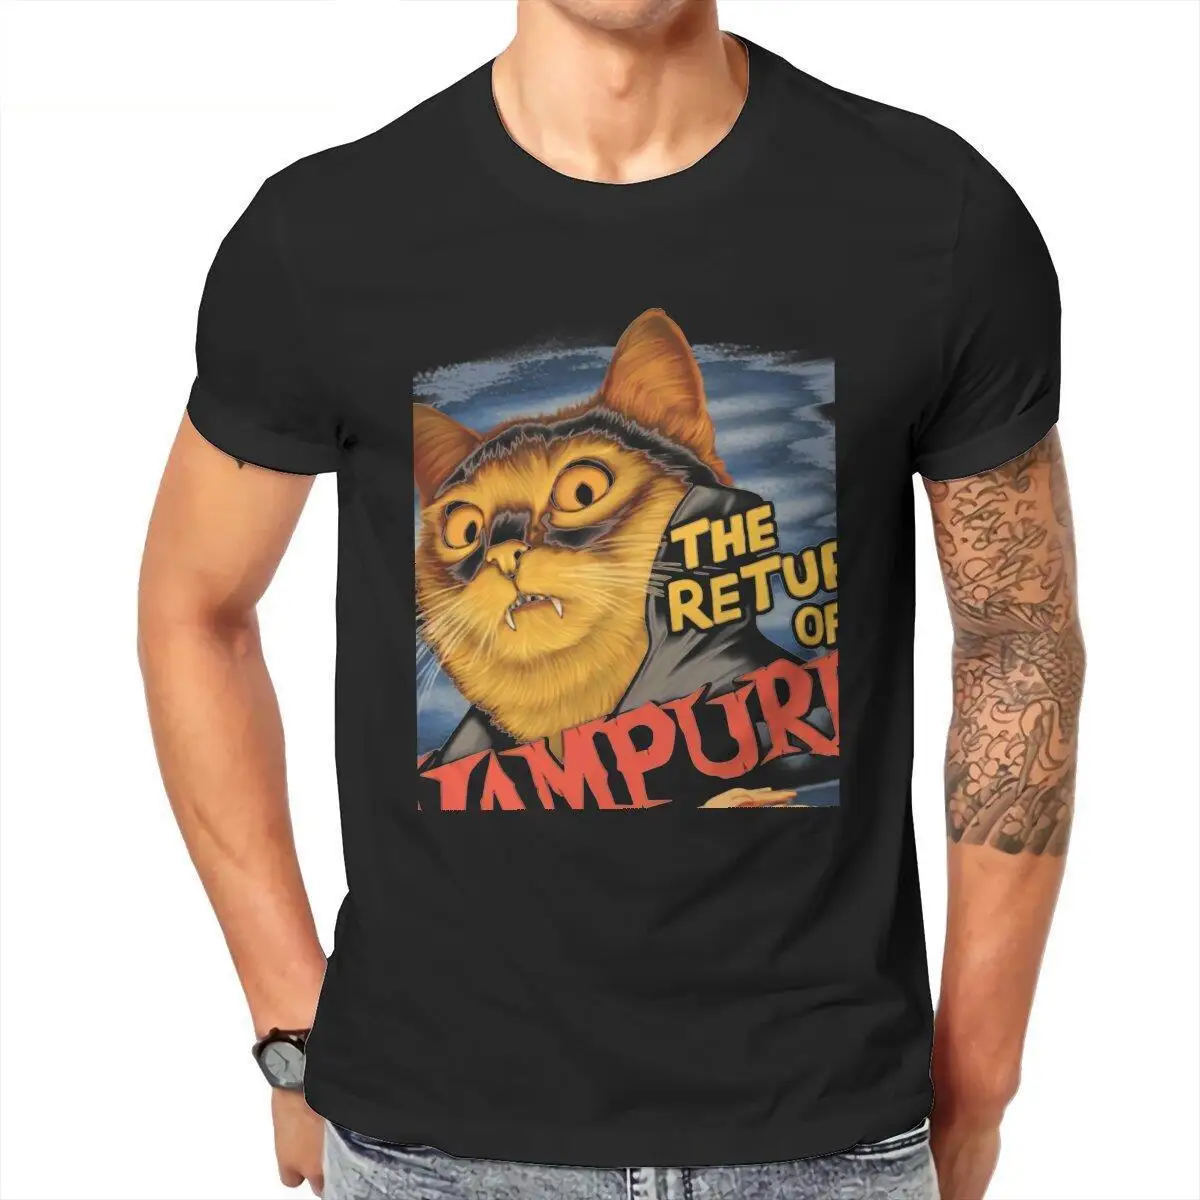 Vintage The Return of Vampurr  T-Shirts Men Round Neck Cotton T Shirt Horror Cat Short Sleeve Tee Shirt Graphic Printed Clothes